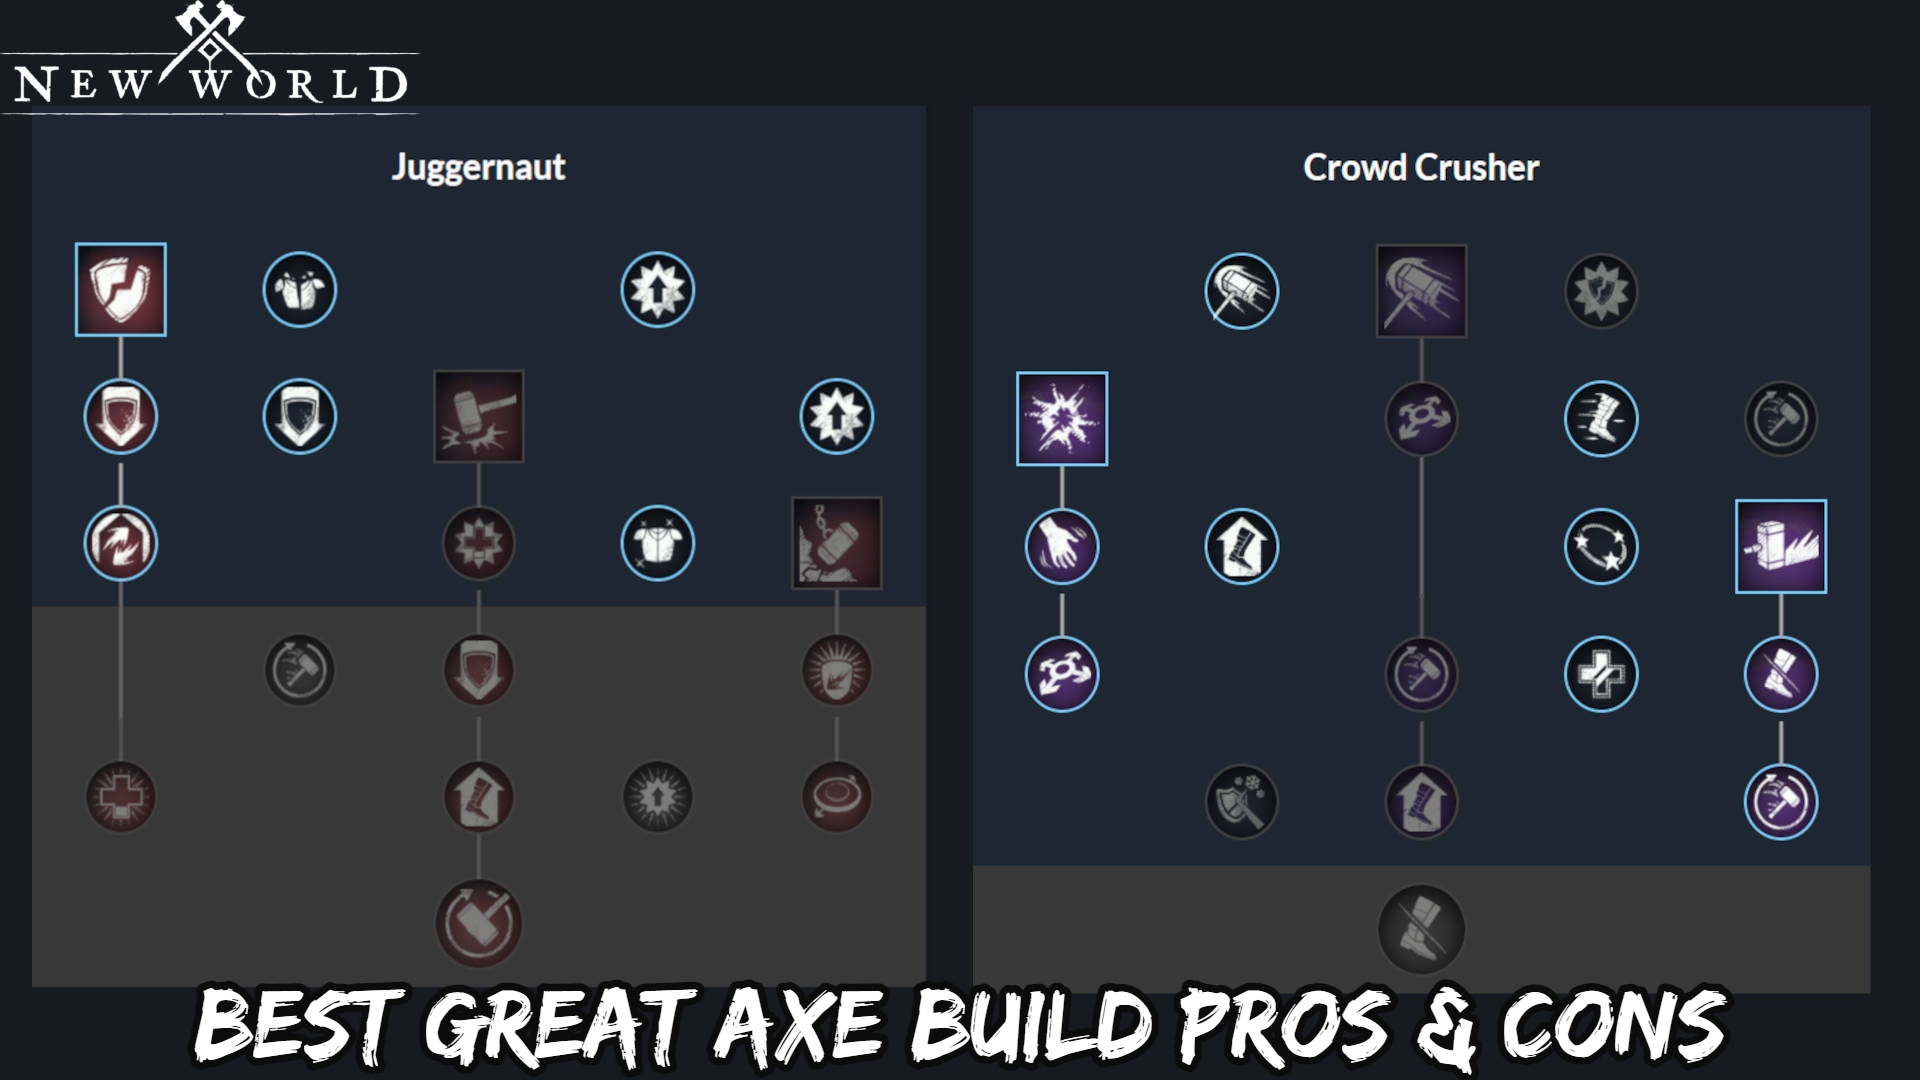 You are currently viewing New World Best Great Axe Build Pros & Cons